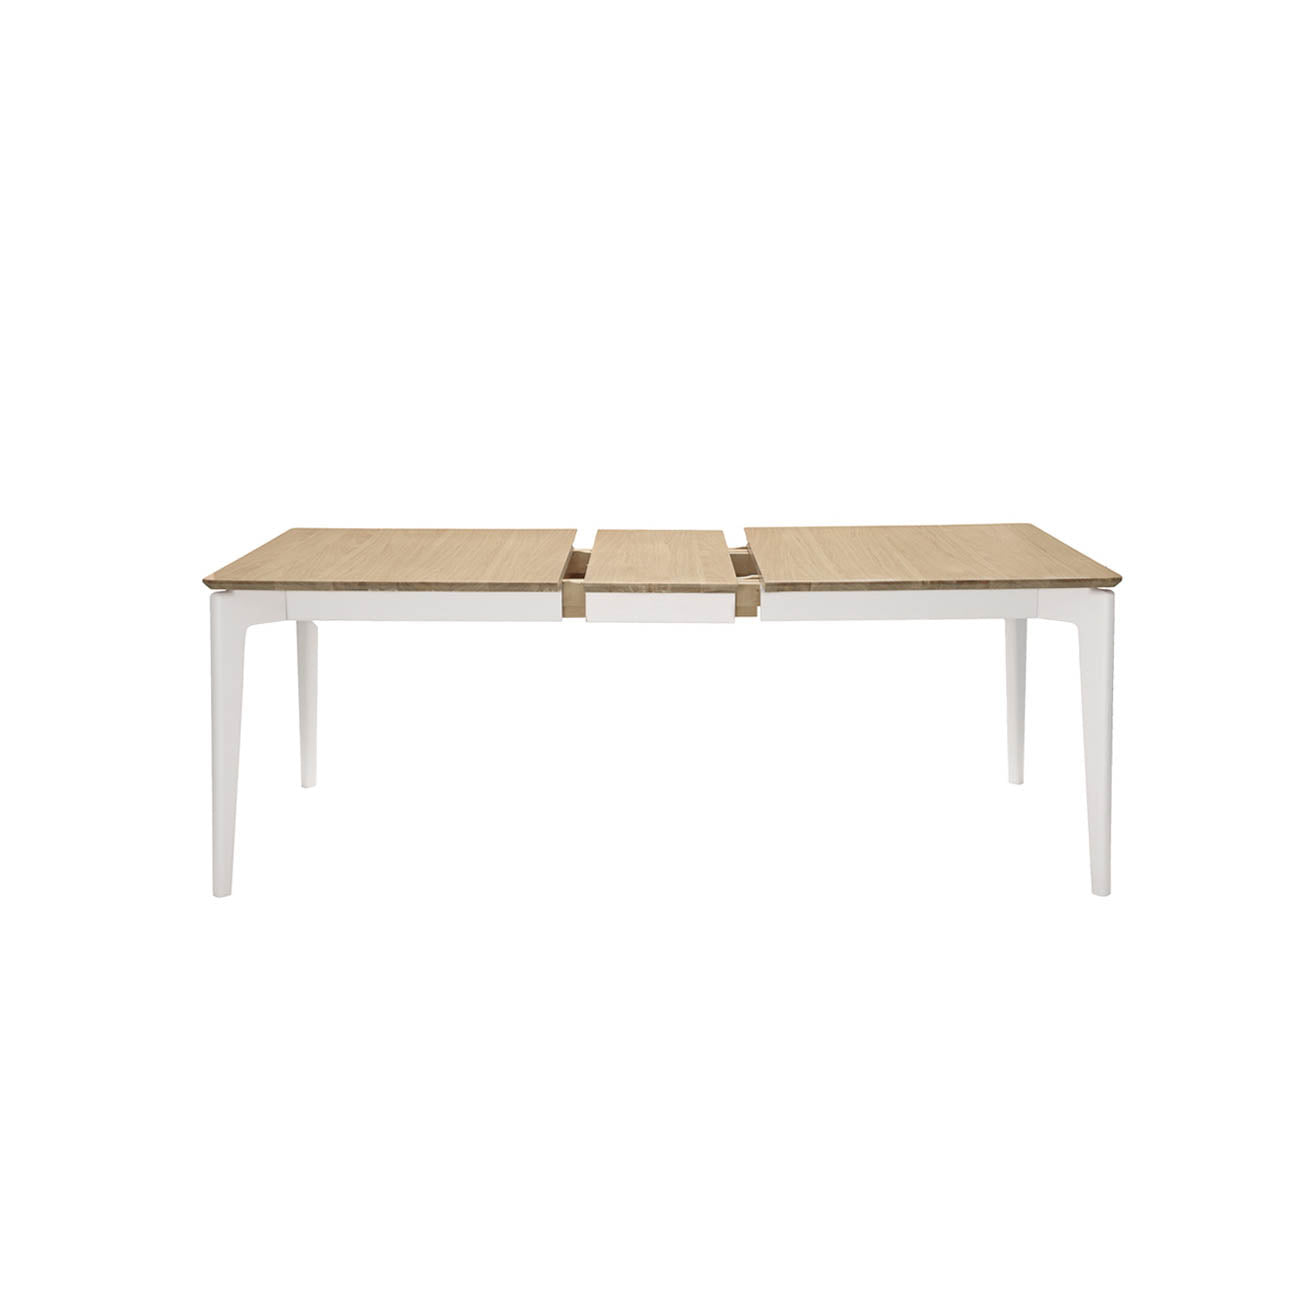 Serenity Dining Table 1650 Extending- Cashmere Oak